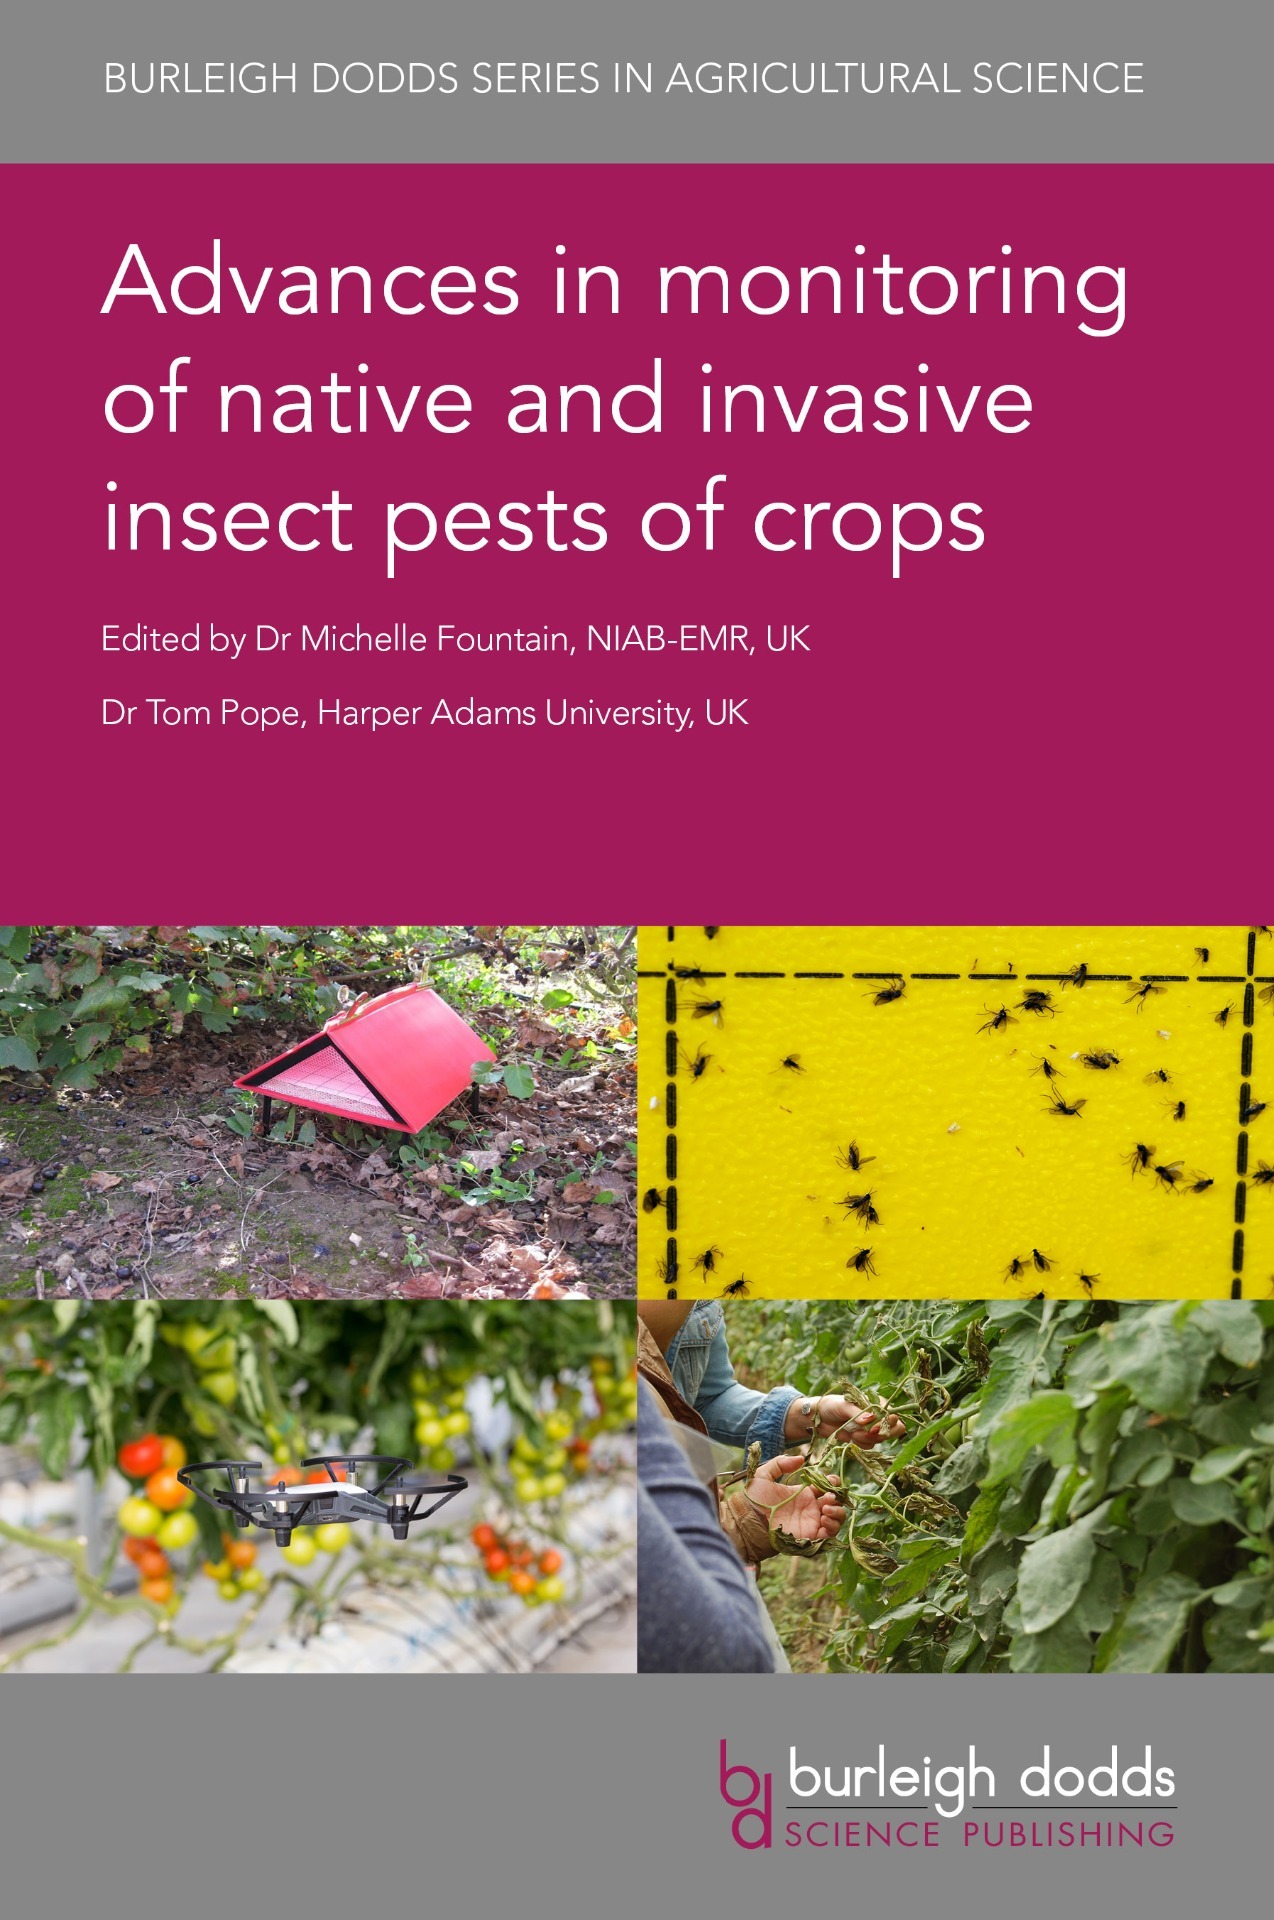 Advances in monitoring of native and invasive insect pests of crops - Cover image